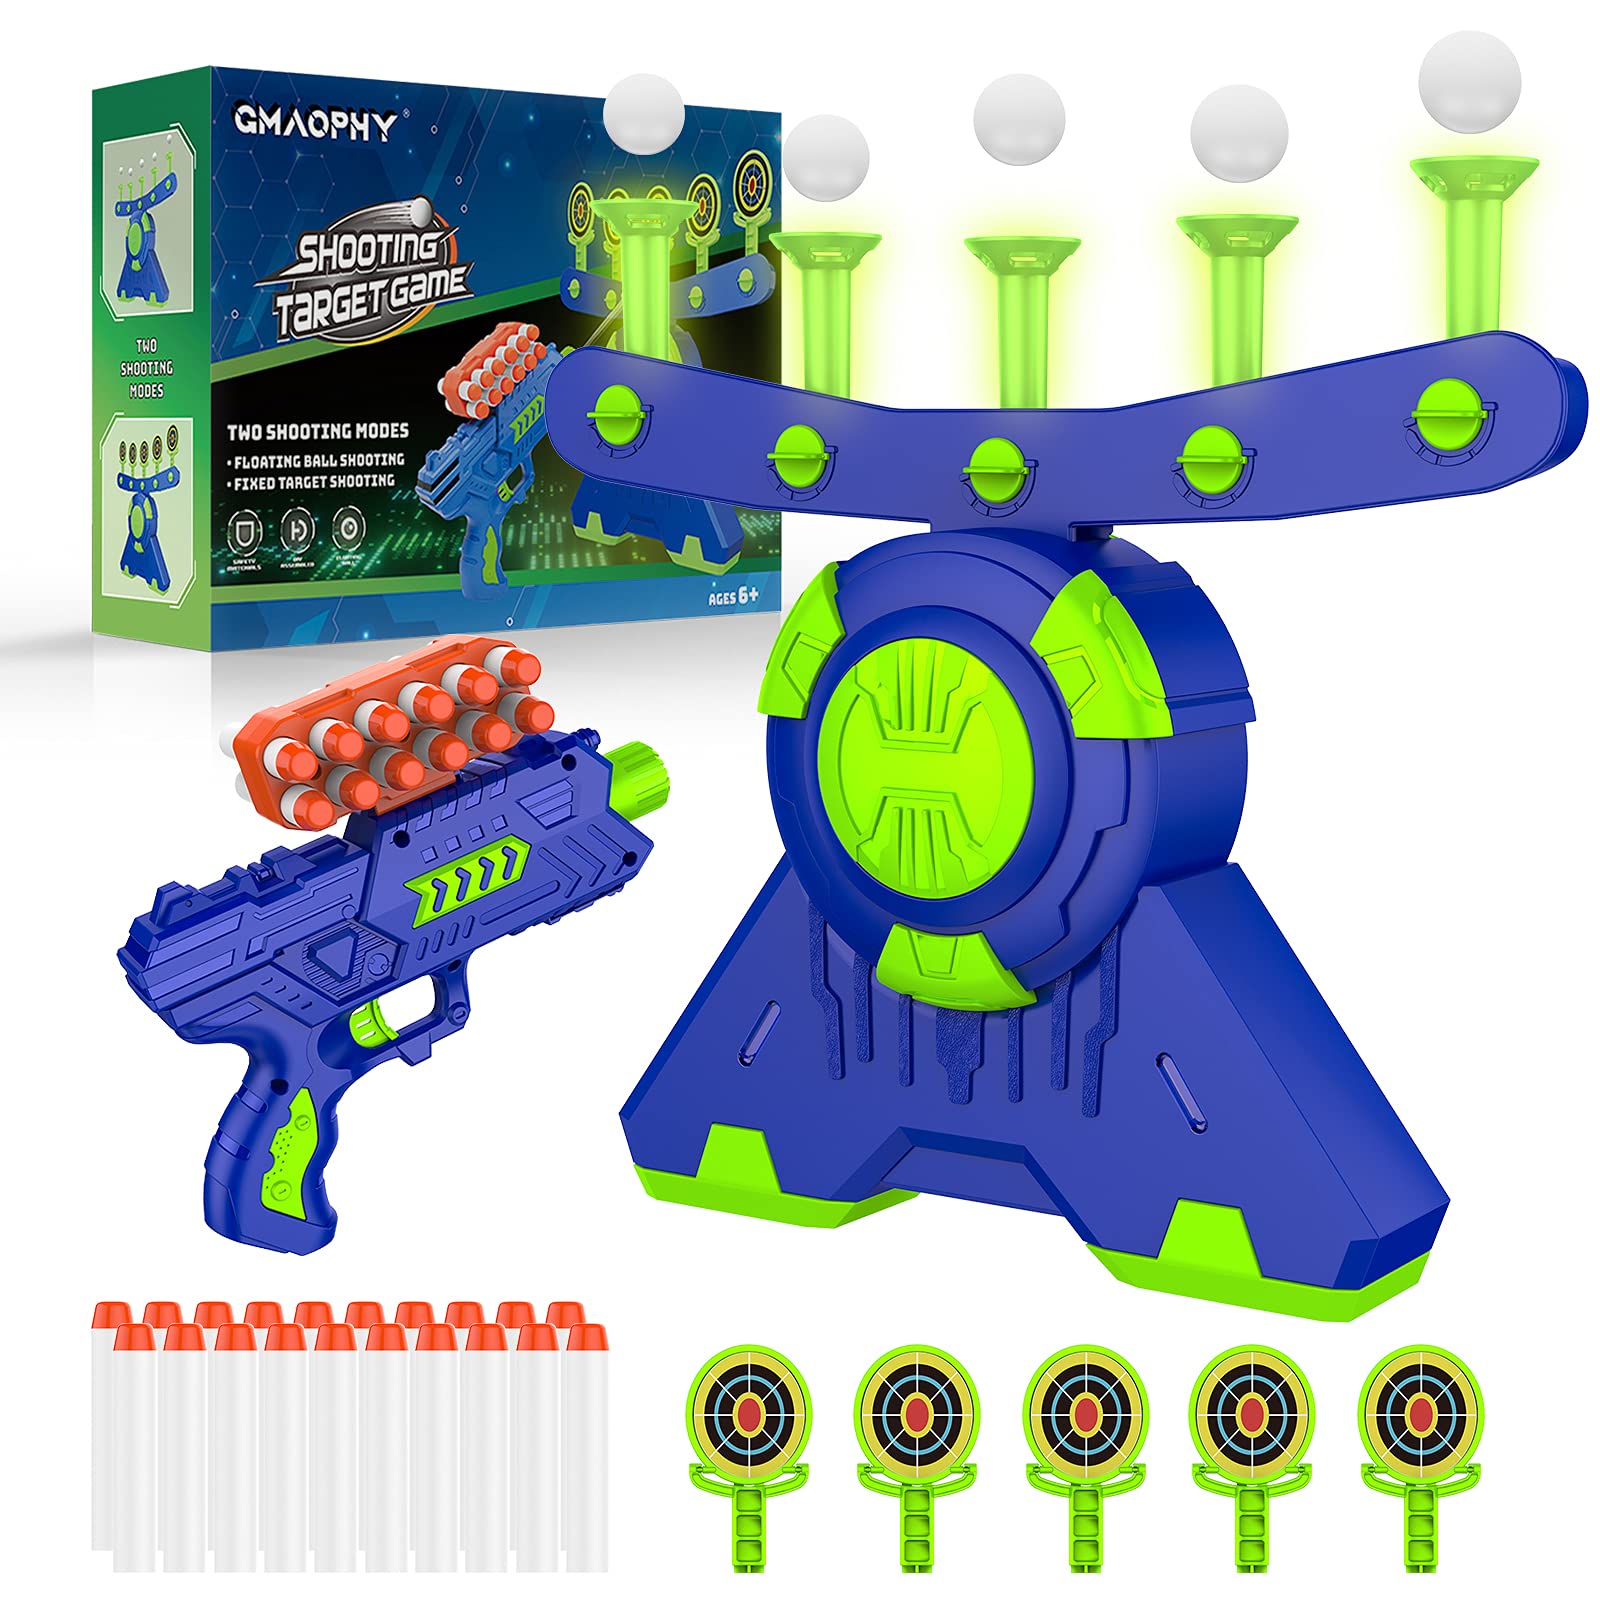 Shooting Games Toy Gift for Age 4, 5, 6, 7, 8, 9, 10+ Years Old Kids, Glow in The Dark Boy Toy Floating Ball Targets with Foam Dart Toy Blaster, 10 Balls 5 Targets, Compatible with Nerf Toy Blaster